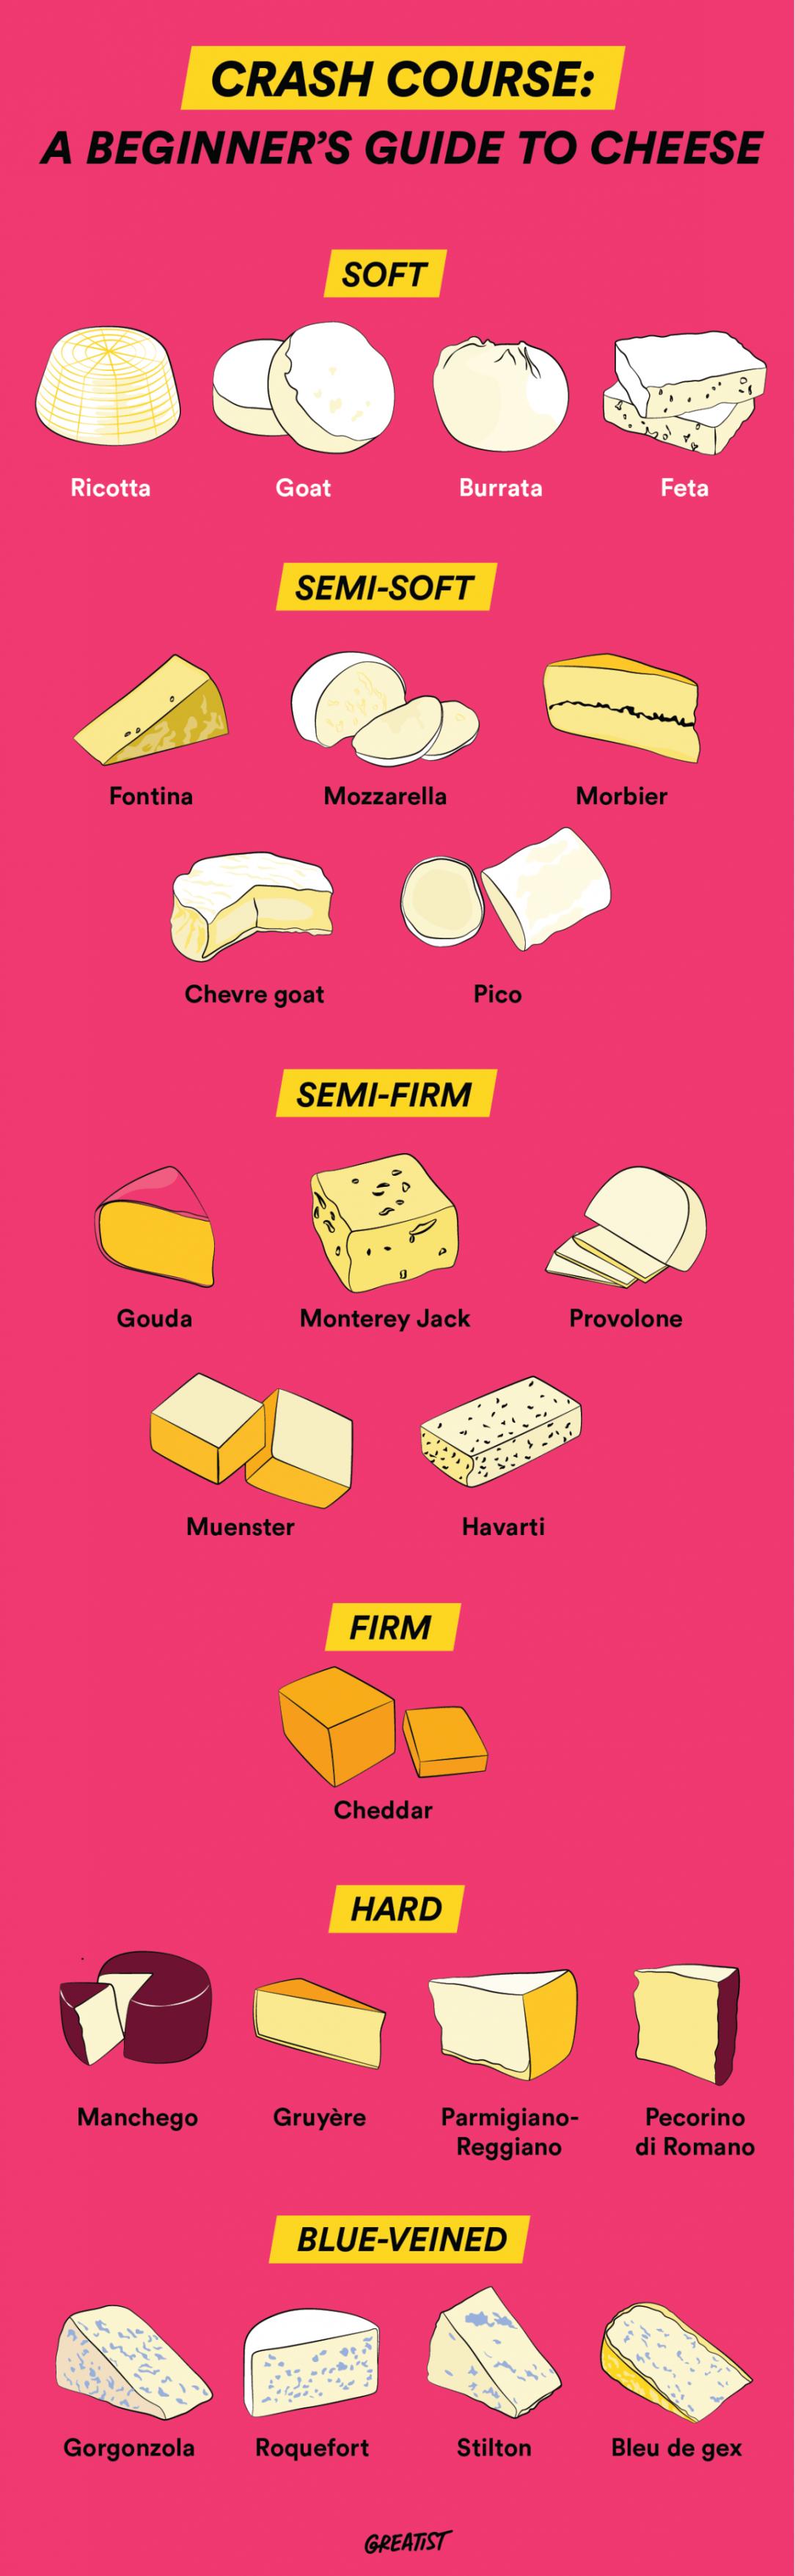 Guide to cheese